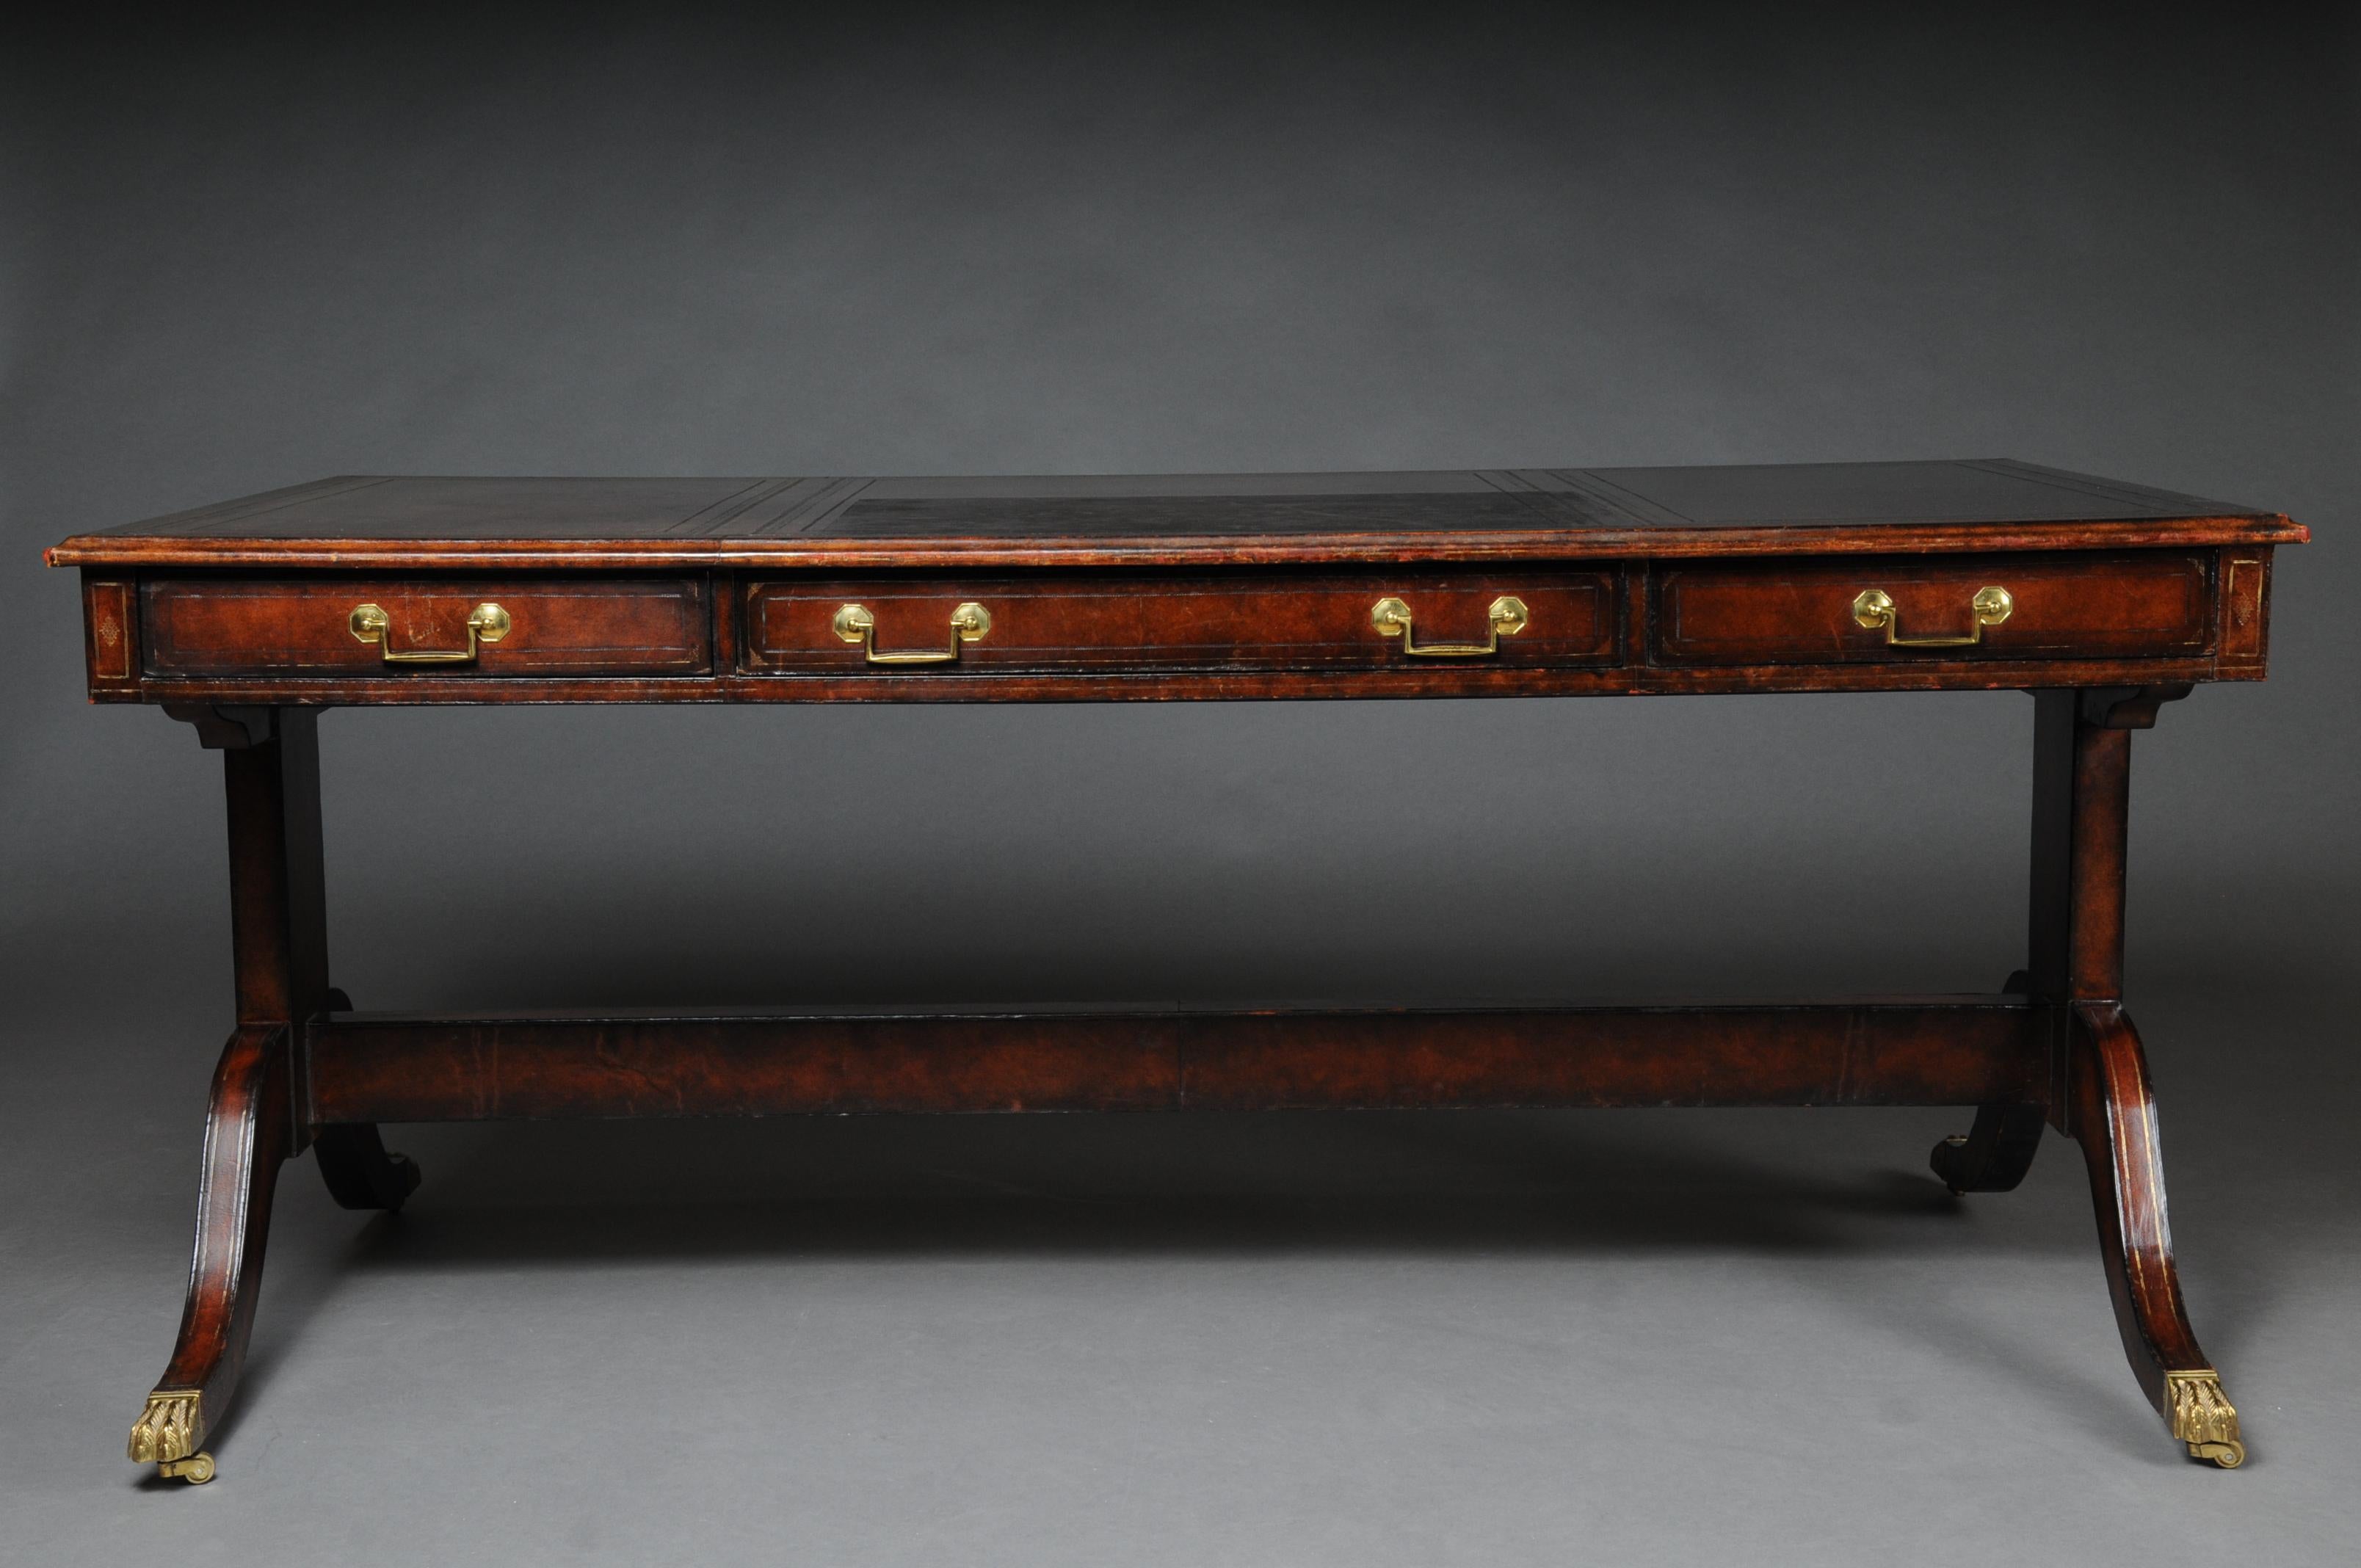 20th Century English Partner Desk, 1870 Writing Desk, Mahogany Completely Covered in Leather